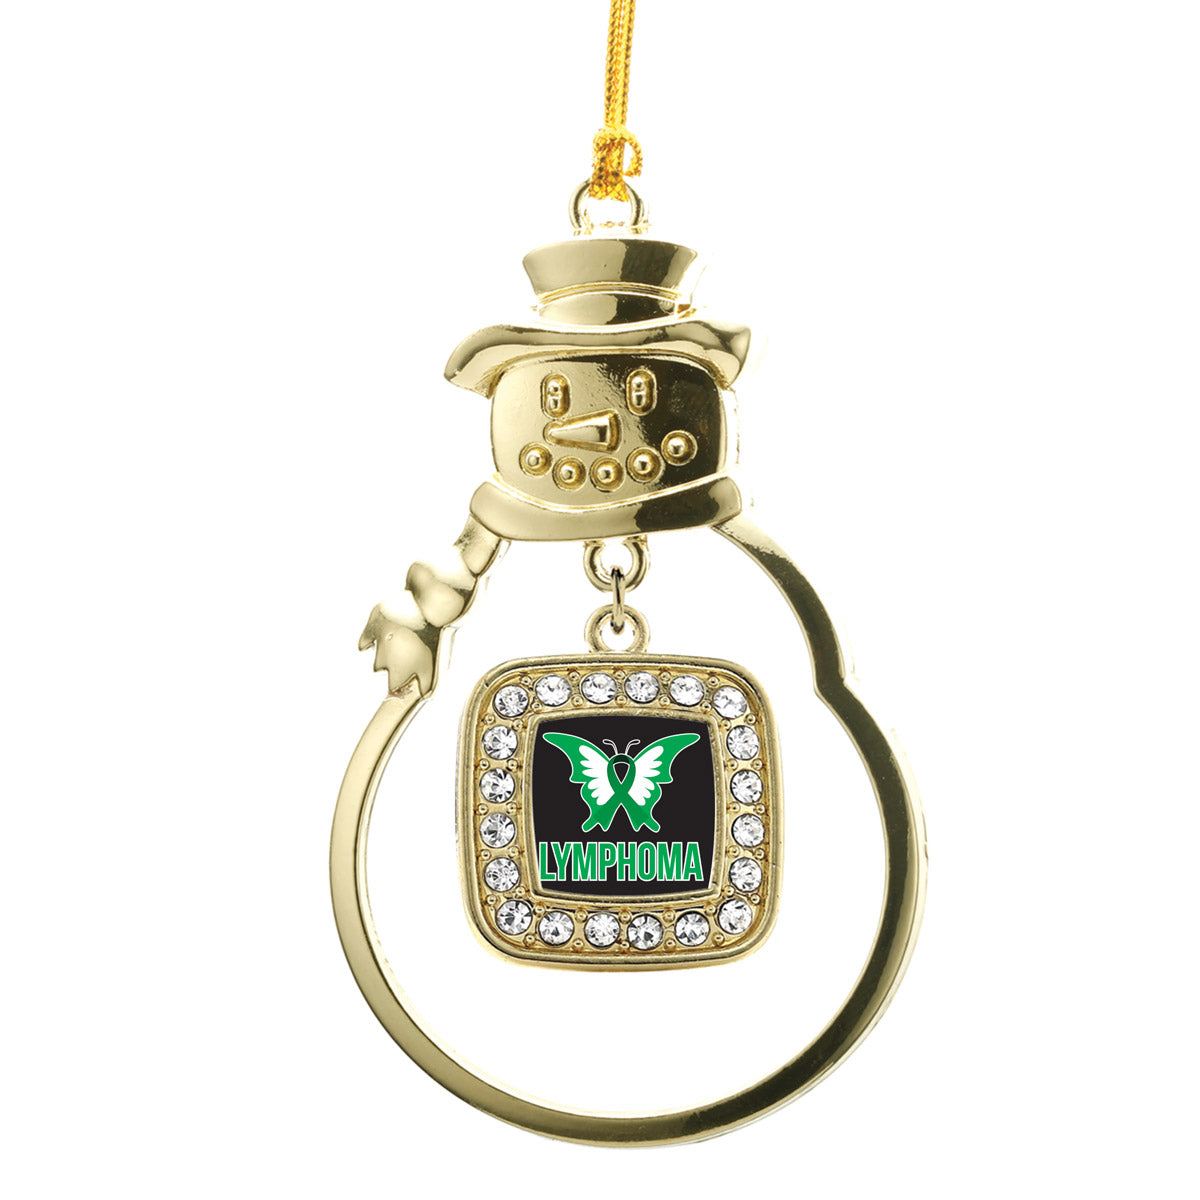 Gold Lymphoma Support and Awareness Square Charm Snowman Ornament